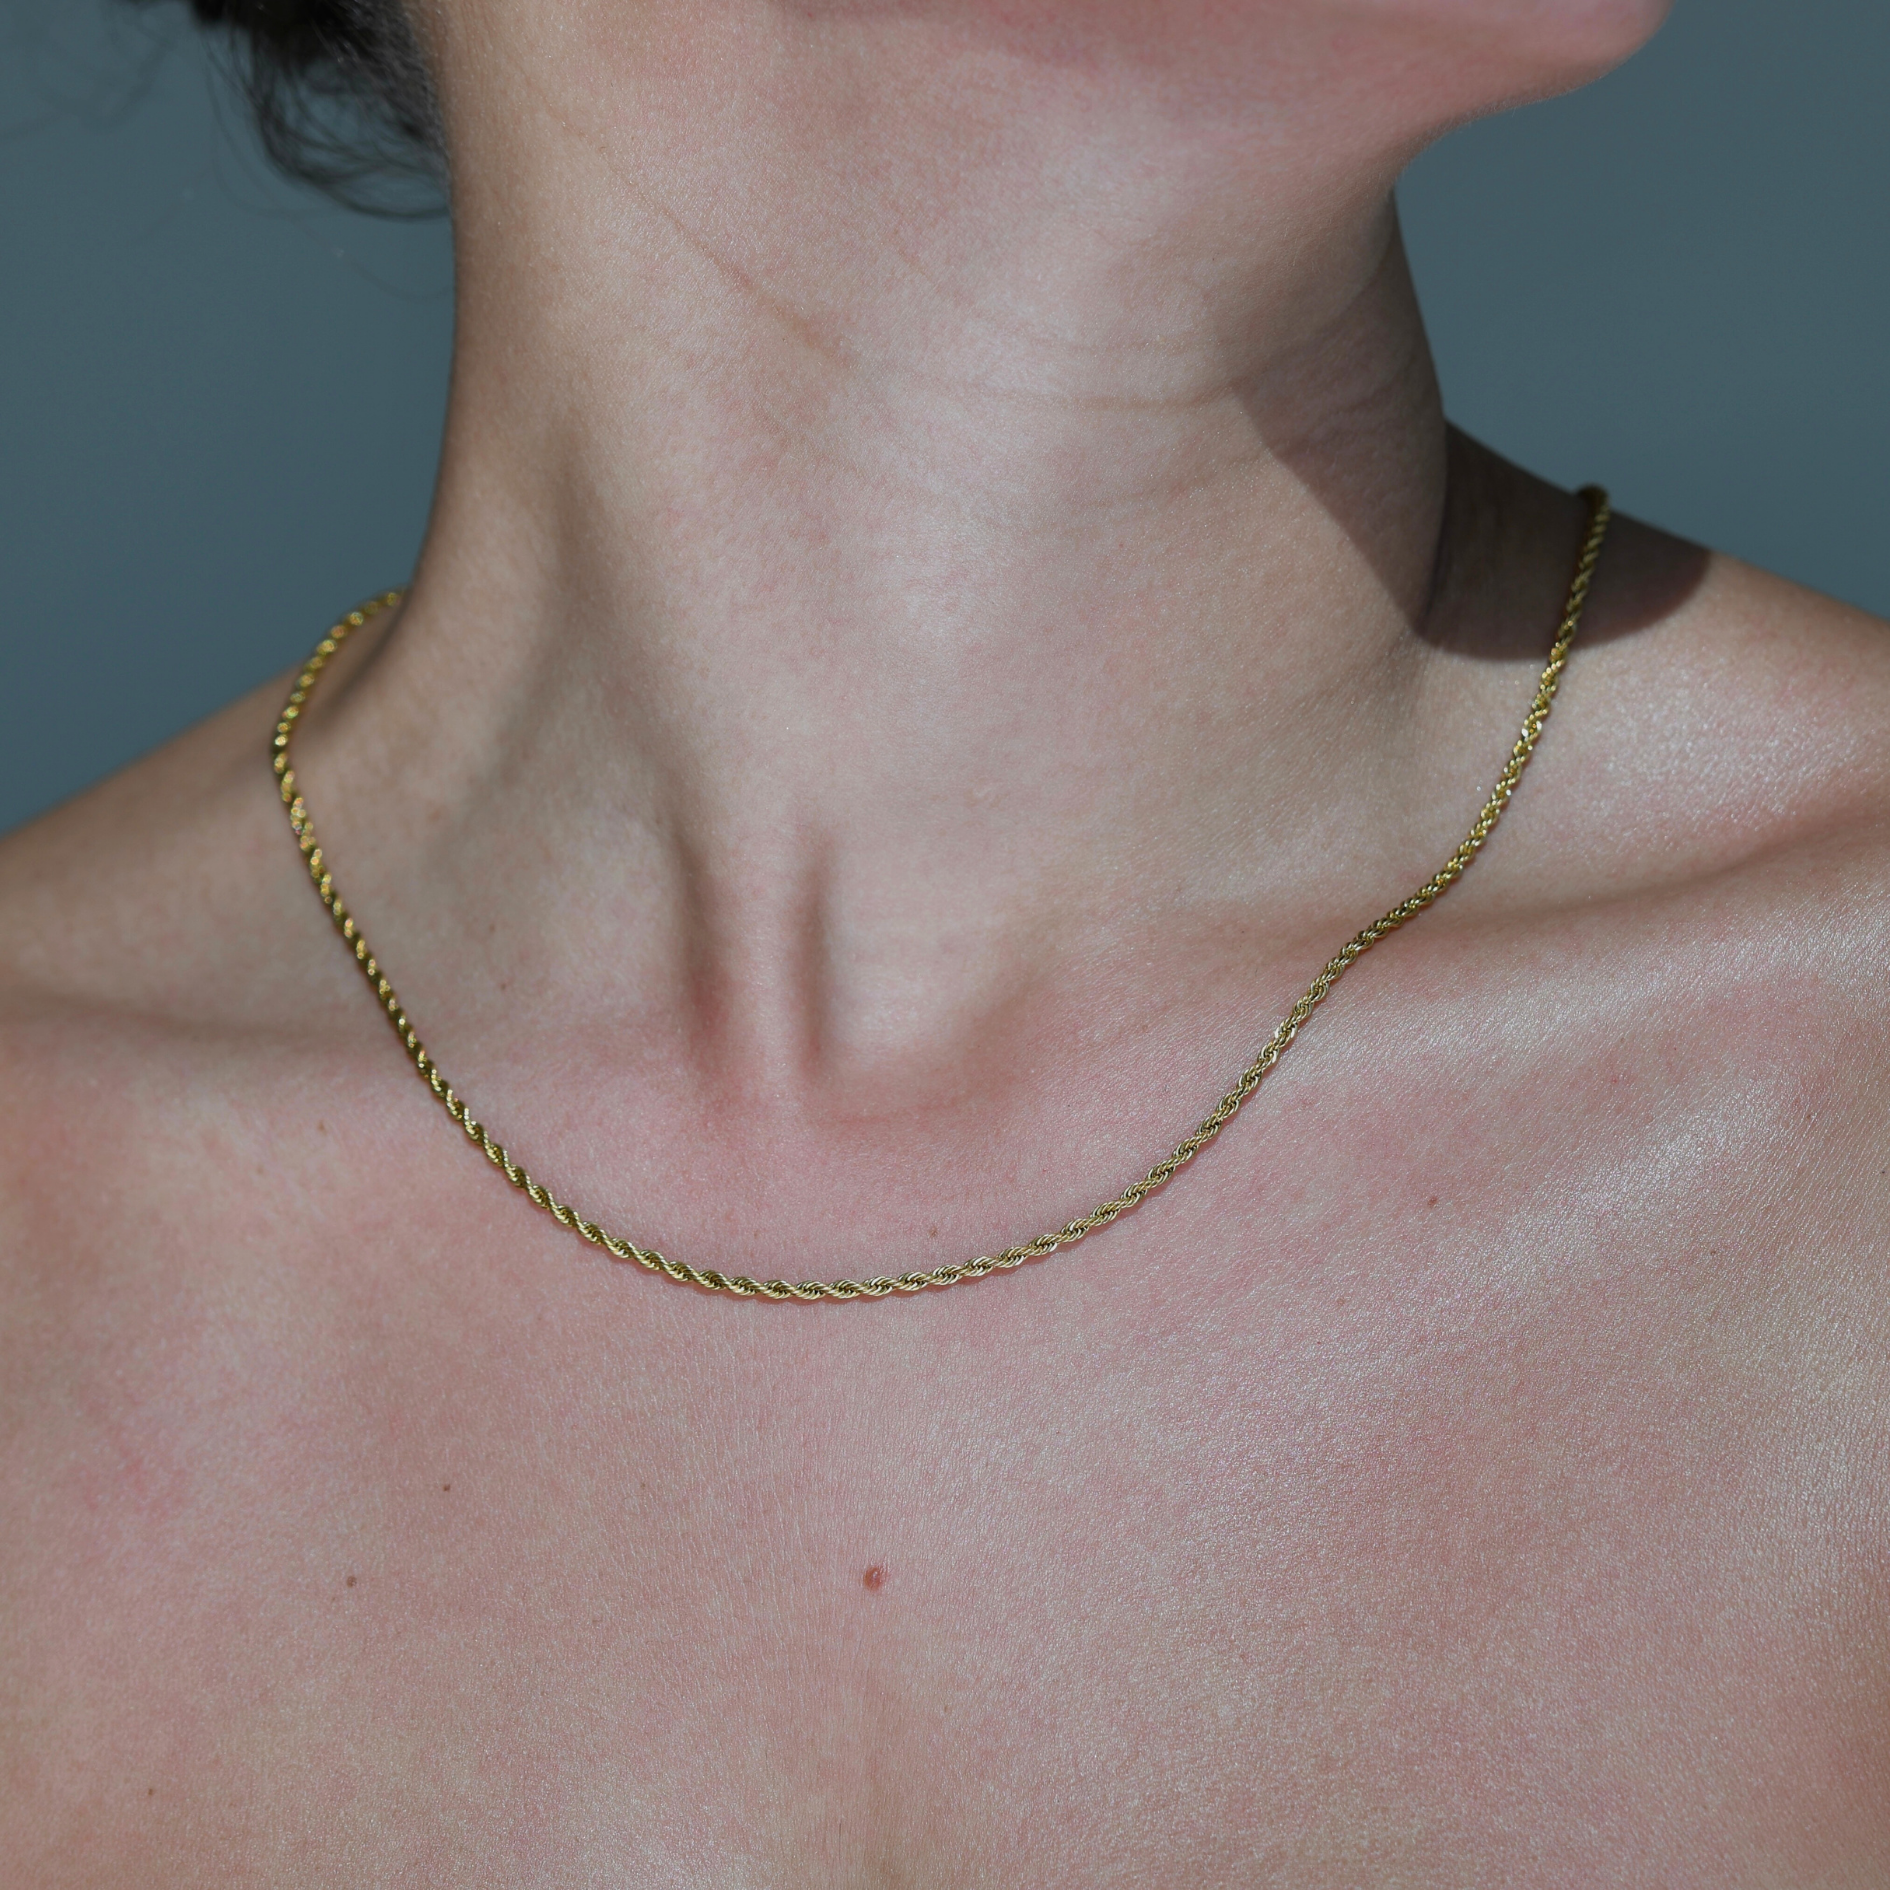 ROPE S Gold Chain Necklace - Rope texture elegant chain necklace.